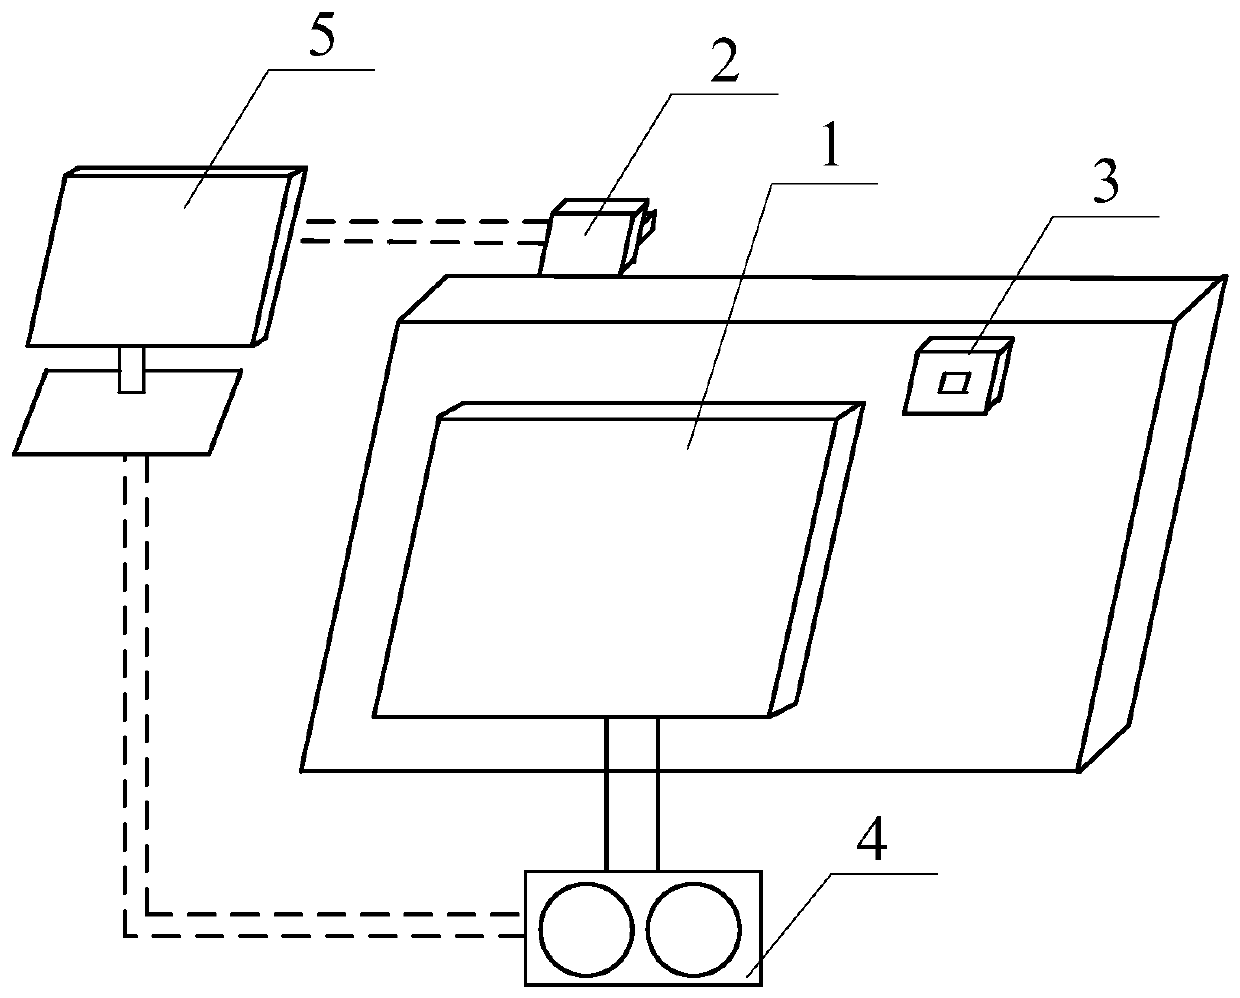 On-board display system